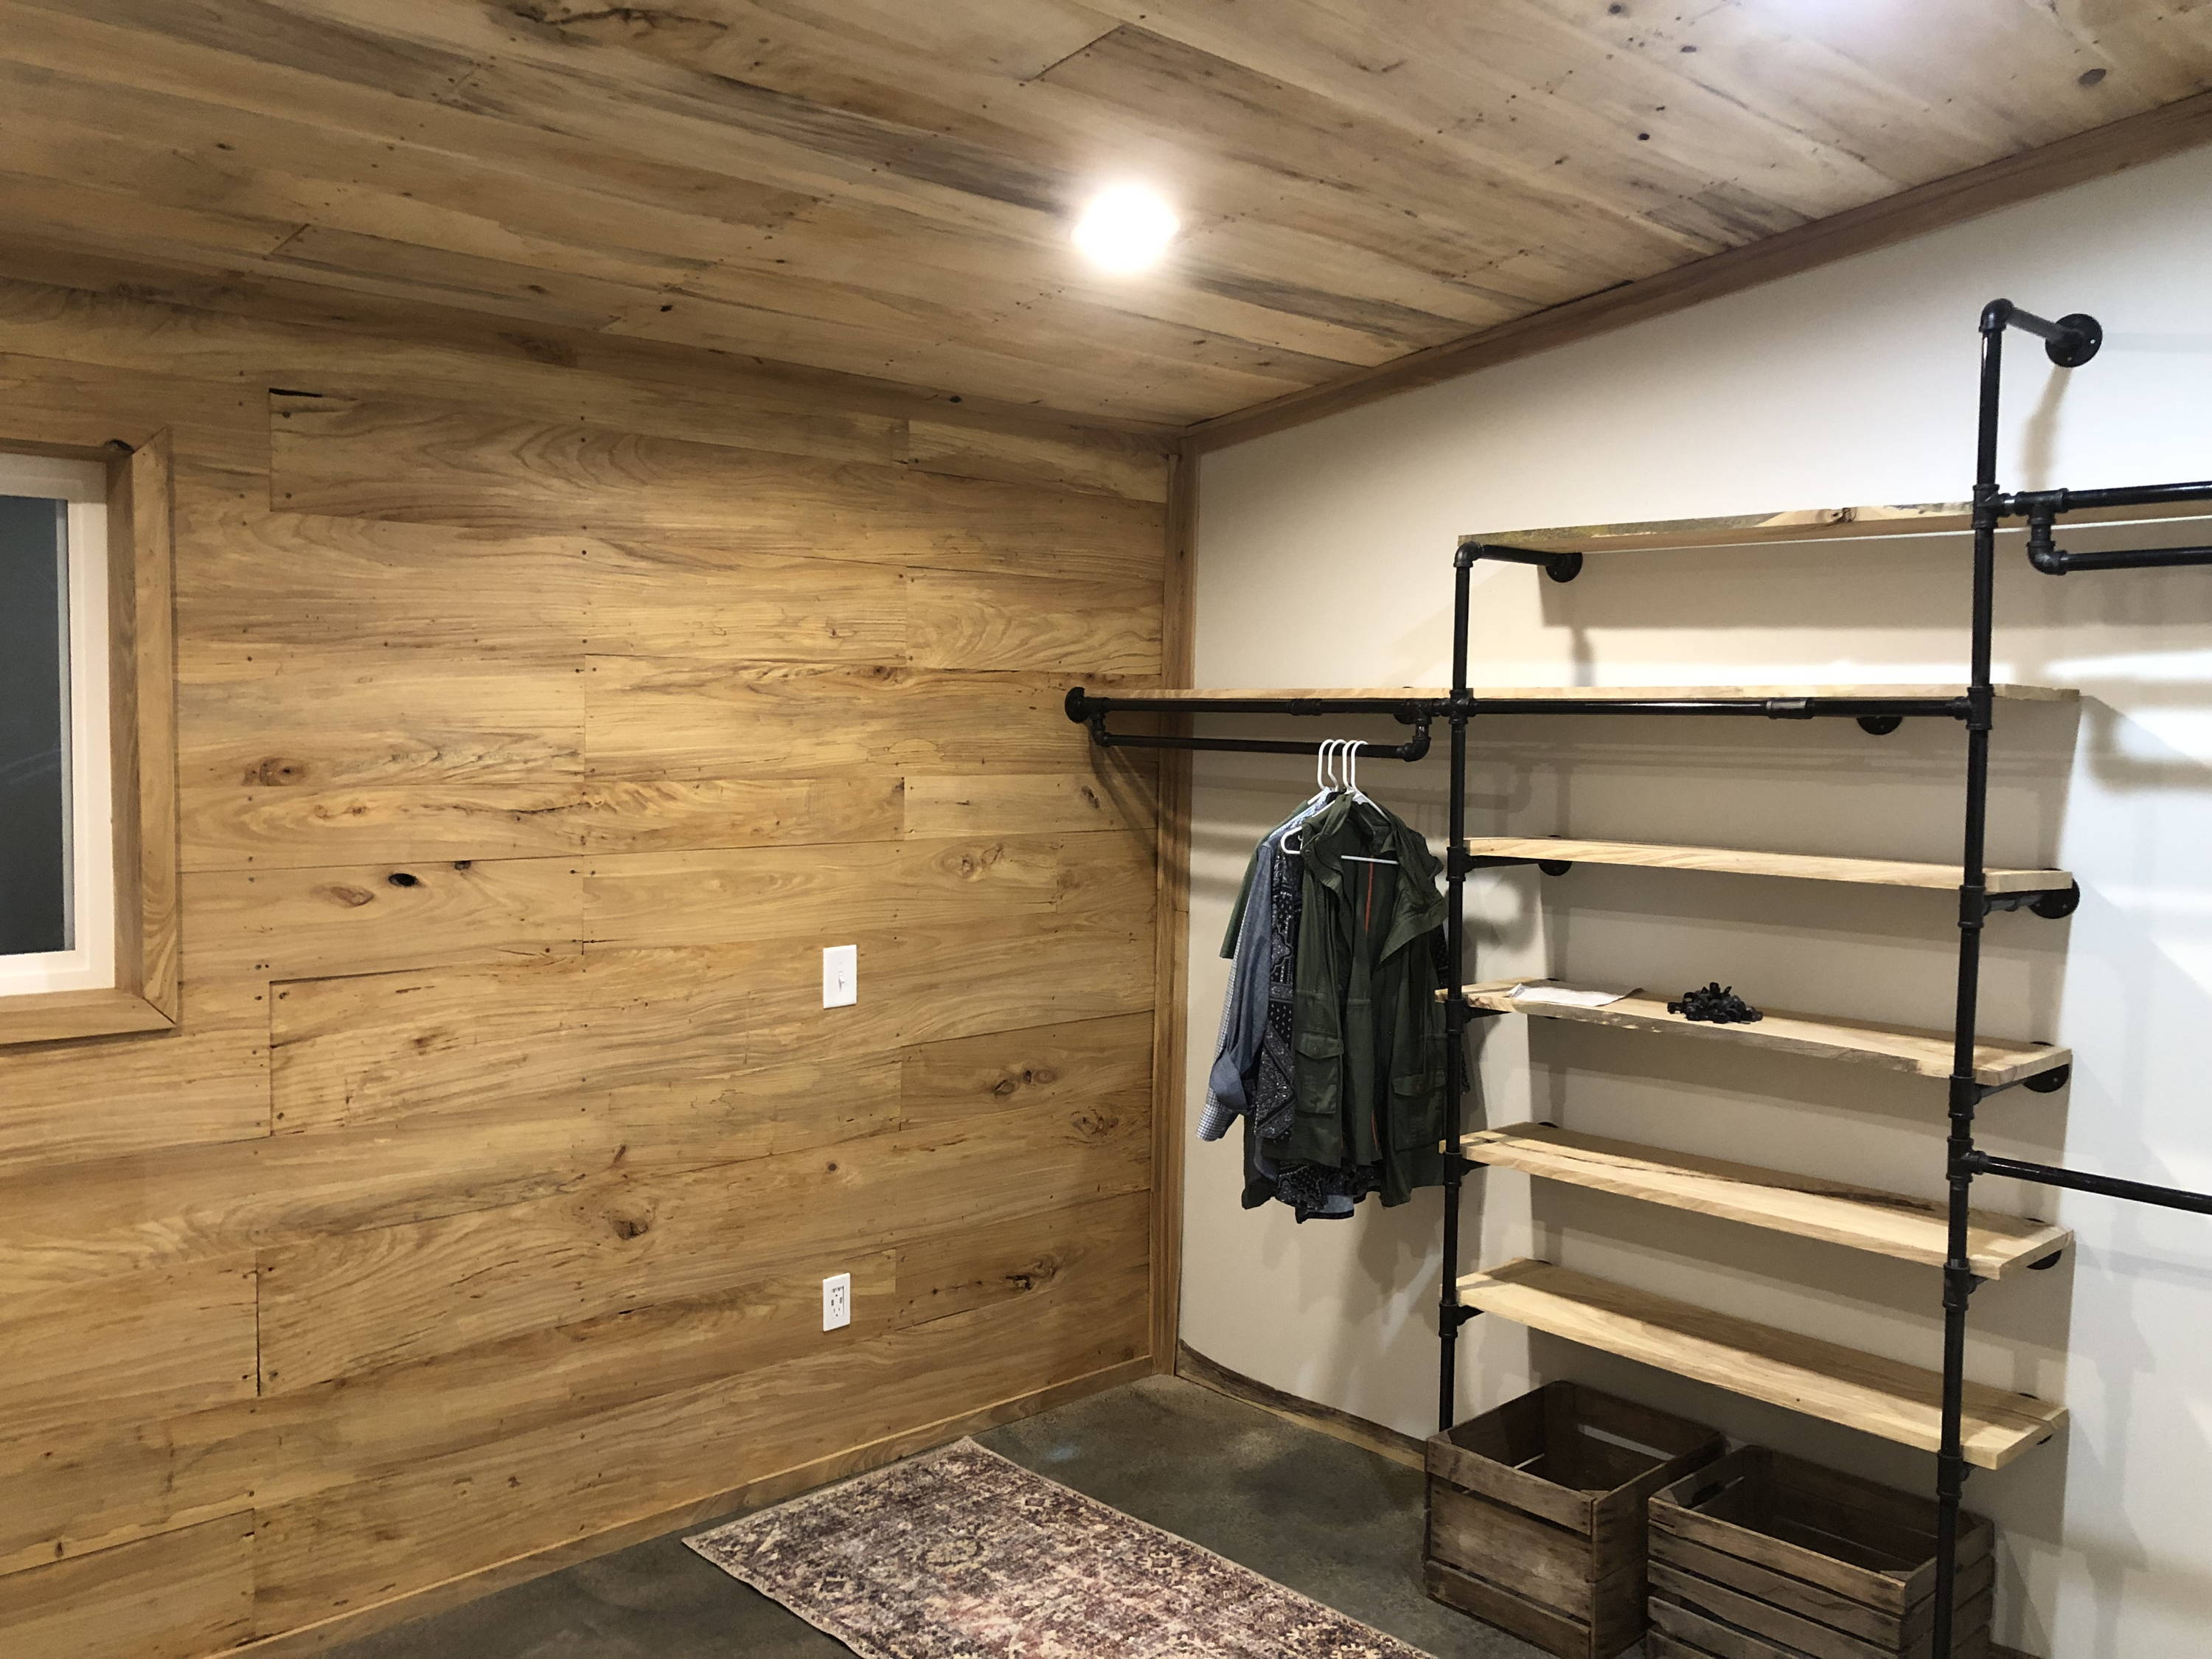 Storage and shelving in the cabin